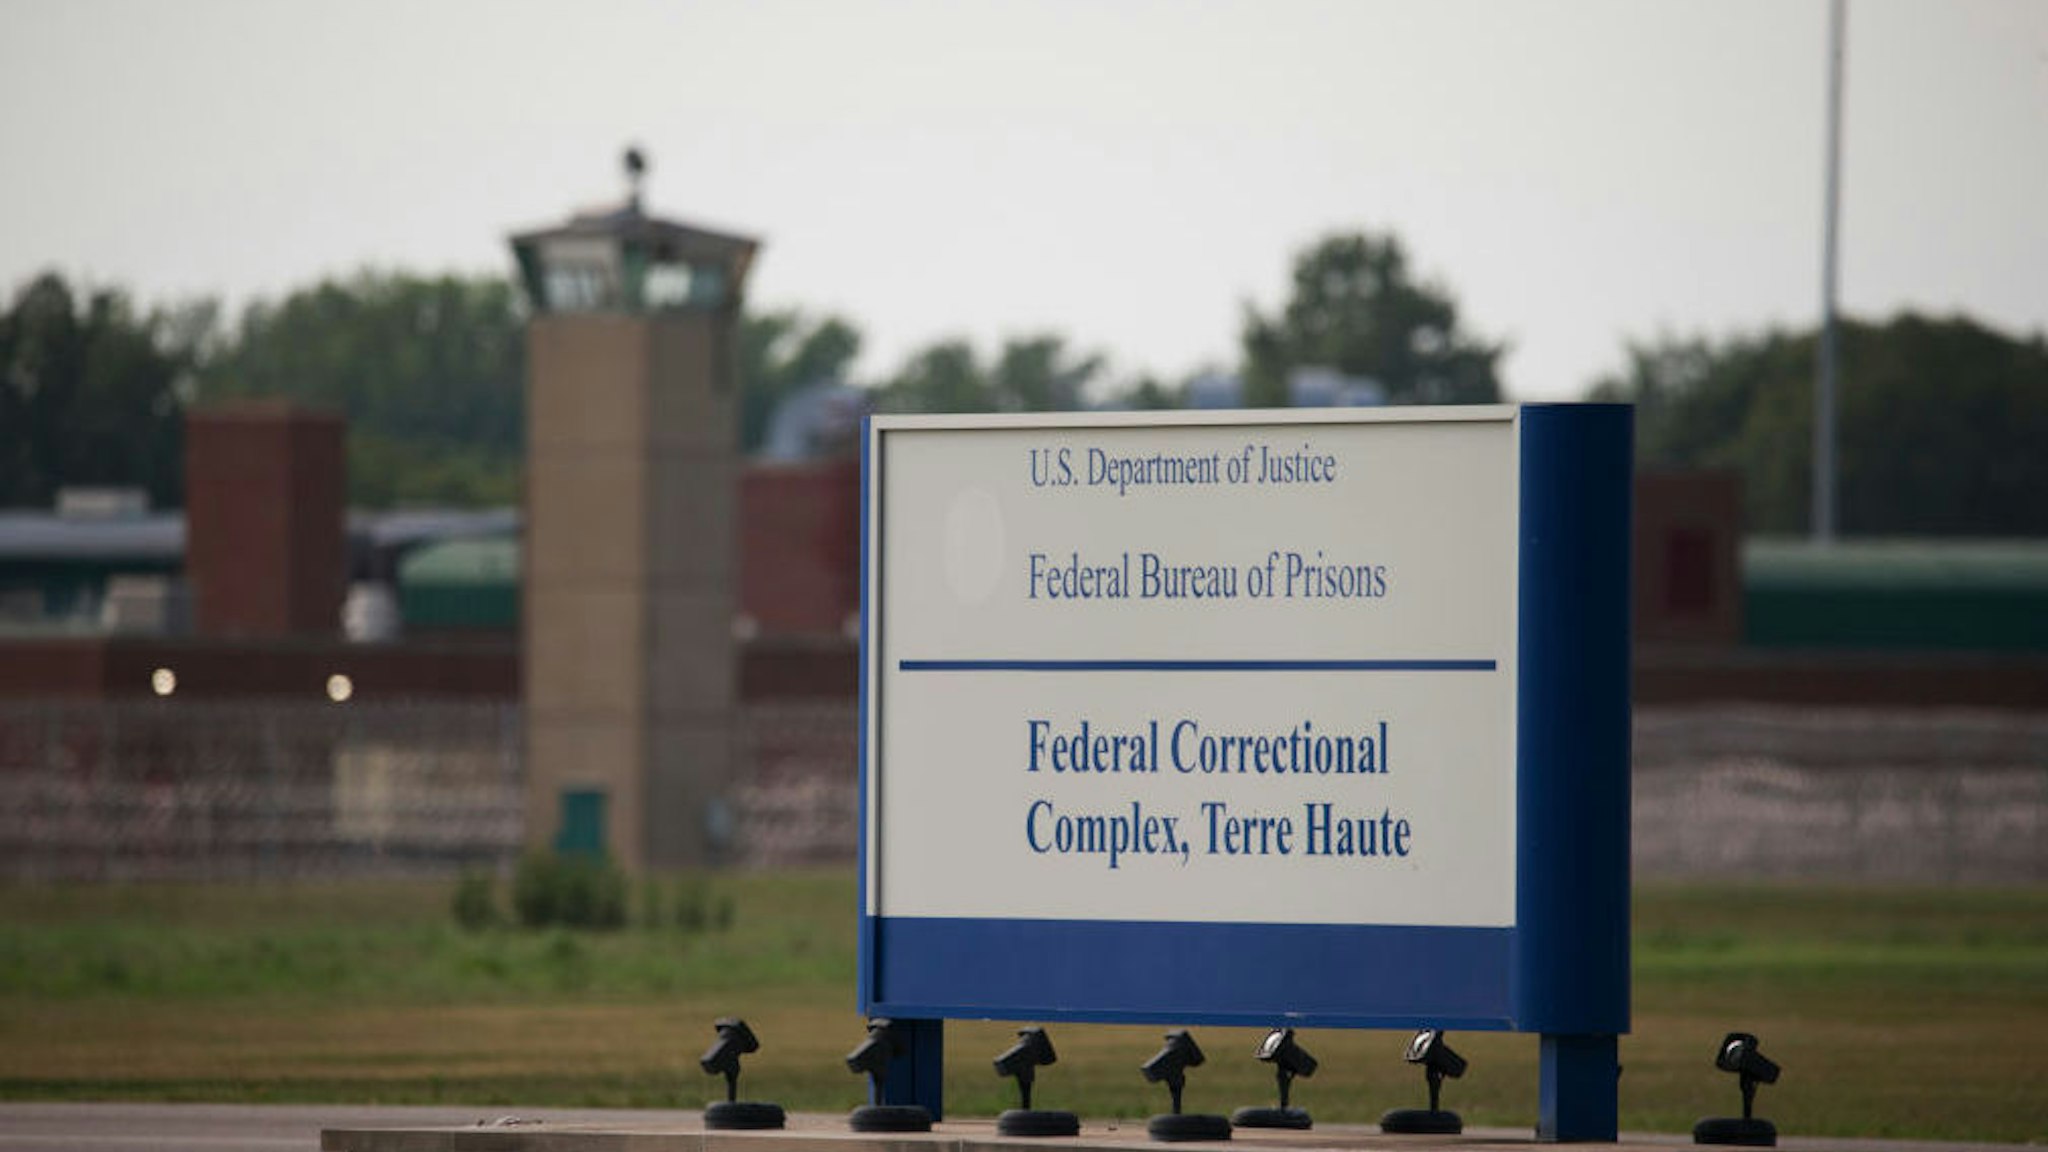 TERRE HAUTE, INDIANA, UNITED STATES - 2020/07/15: View of a sign outside the Terre Haute Federal Correctional Complex where death row inmate Wesley Ira Purkey was scheduled to be executed by lethal injection. Purkey's execution scheduled for 7 p.m., was delayed by a judge. Purkey suffers from Dementia, and Alzheimer's disease. Wesley Ira Purkey was convicted of a gruesome 1998 kidnapping and killing.